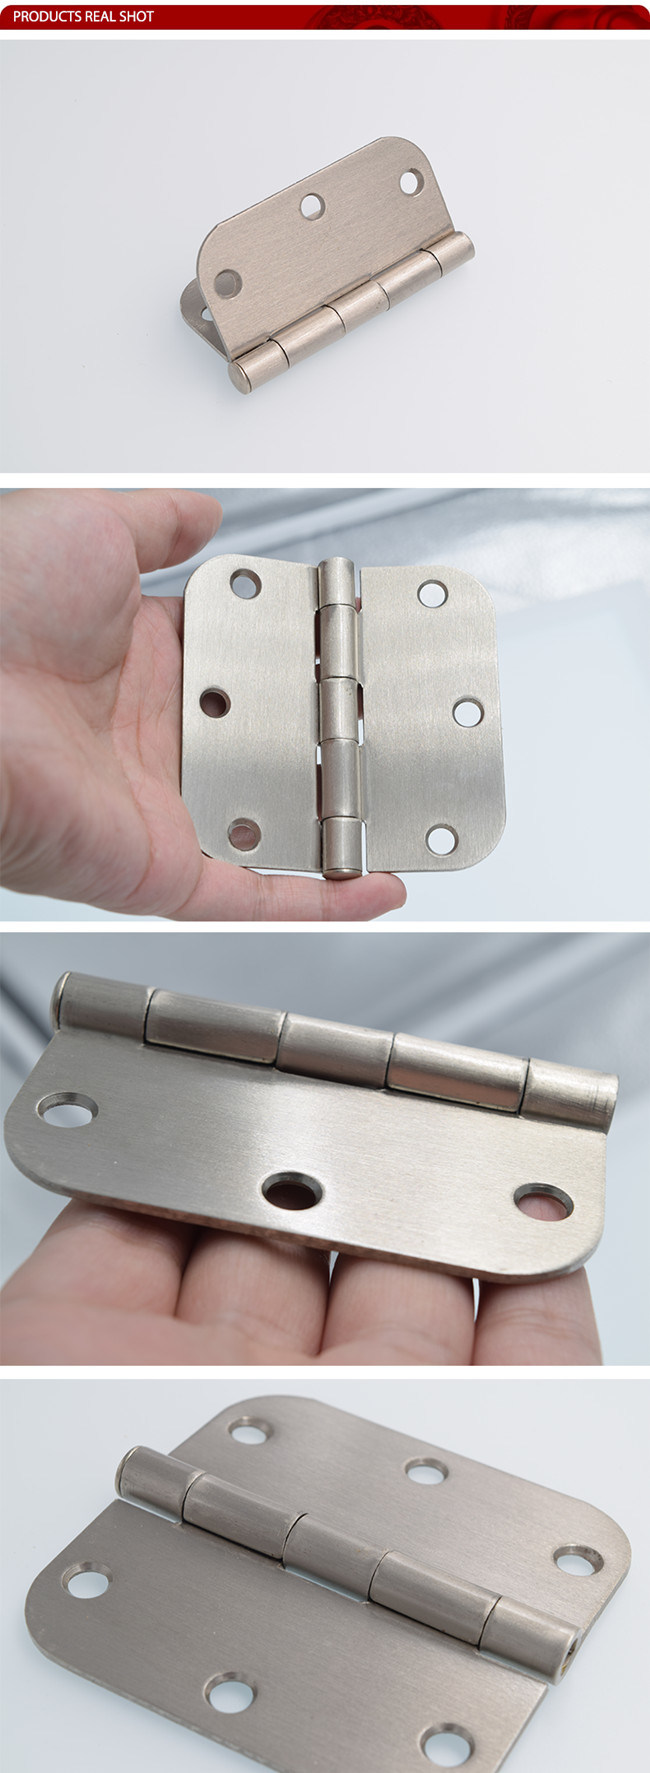 3 Inch Template Butt Hinge Furniture Hardware with UL Certificate